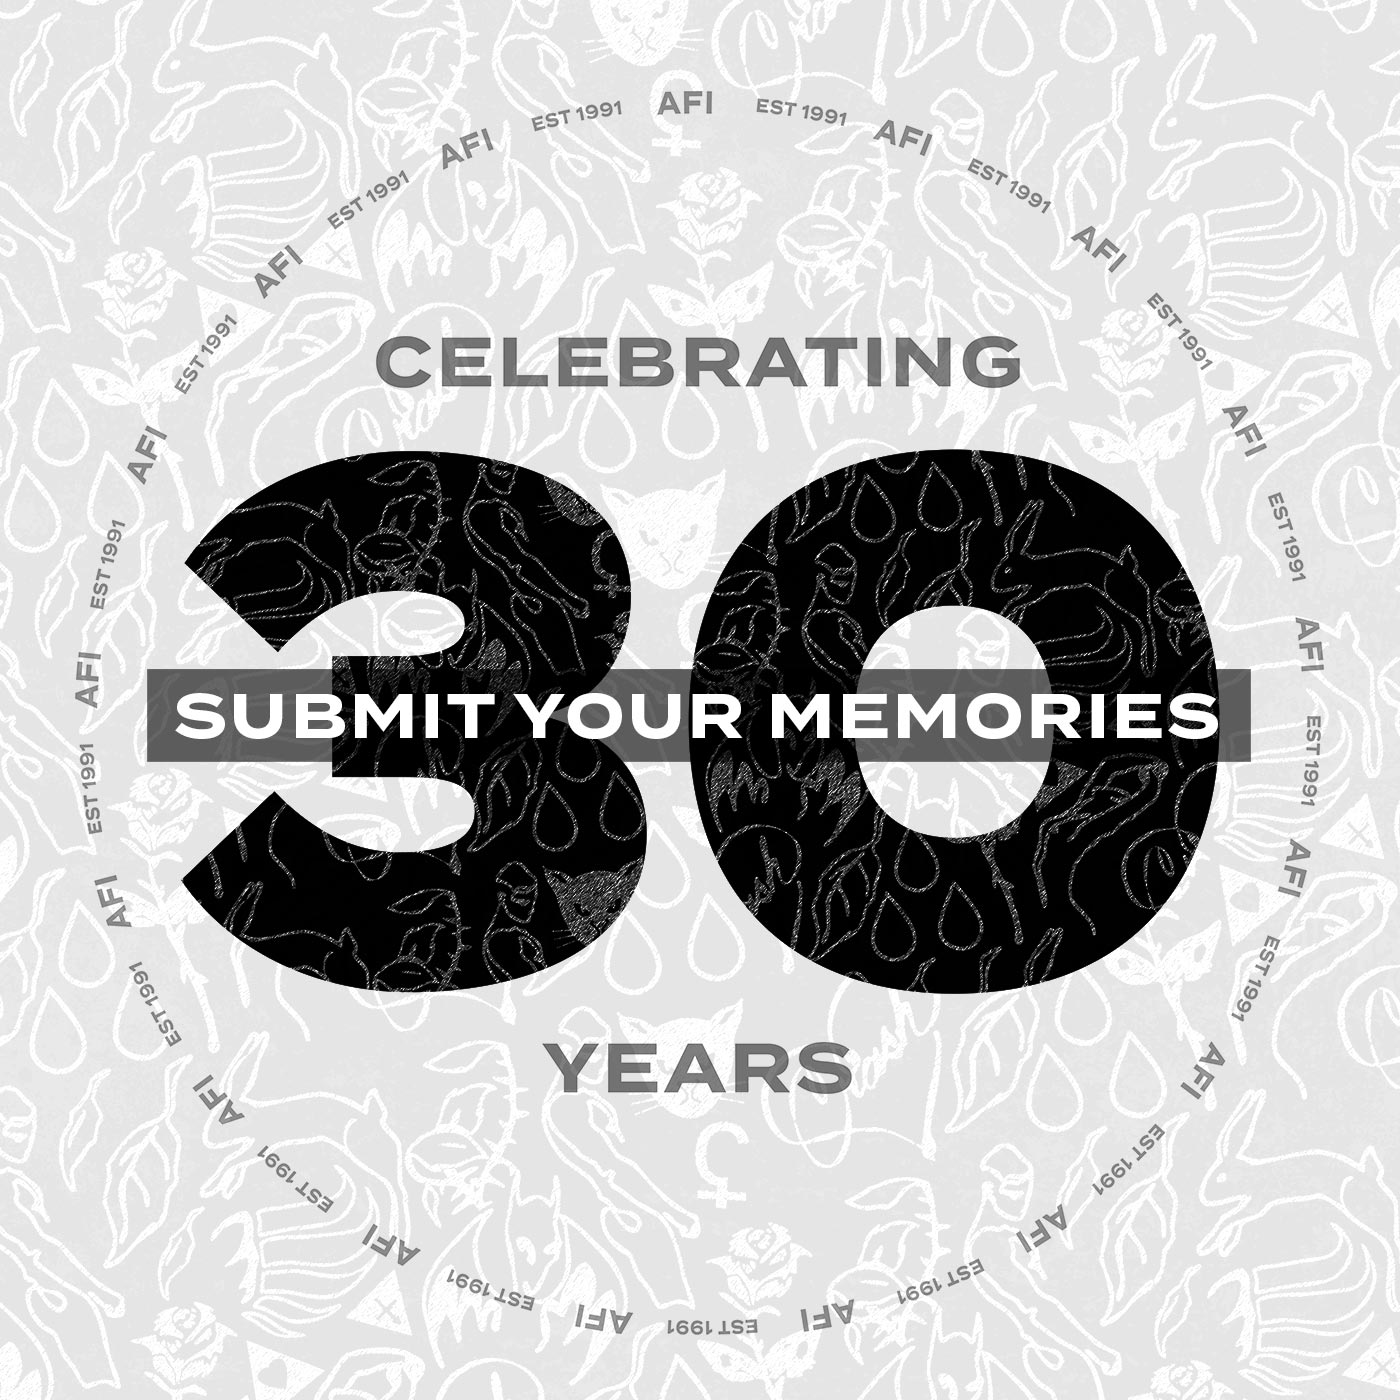 AFI - Celebrating 30 Years - Submit Your Memory